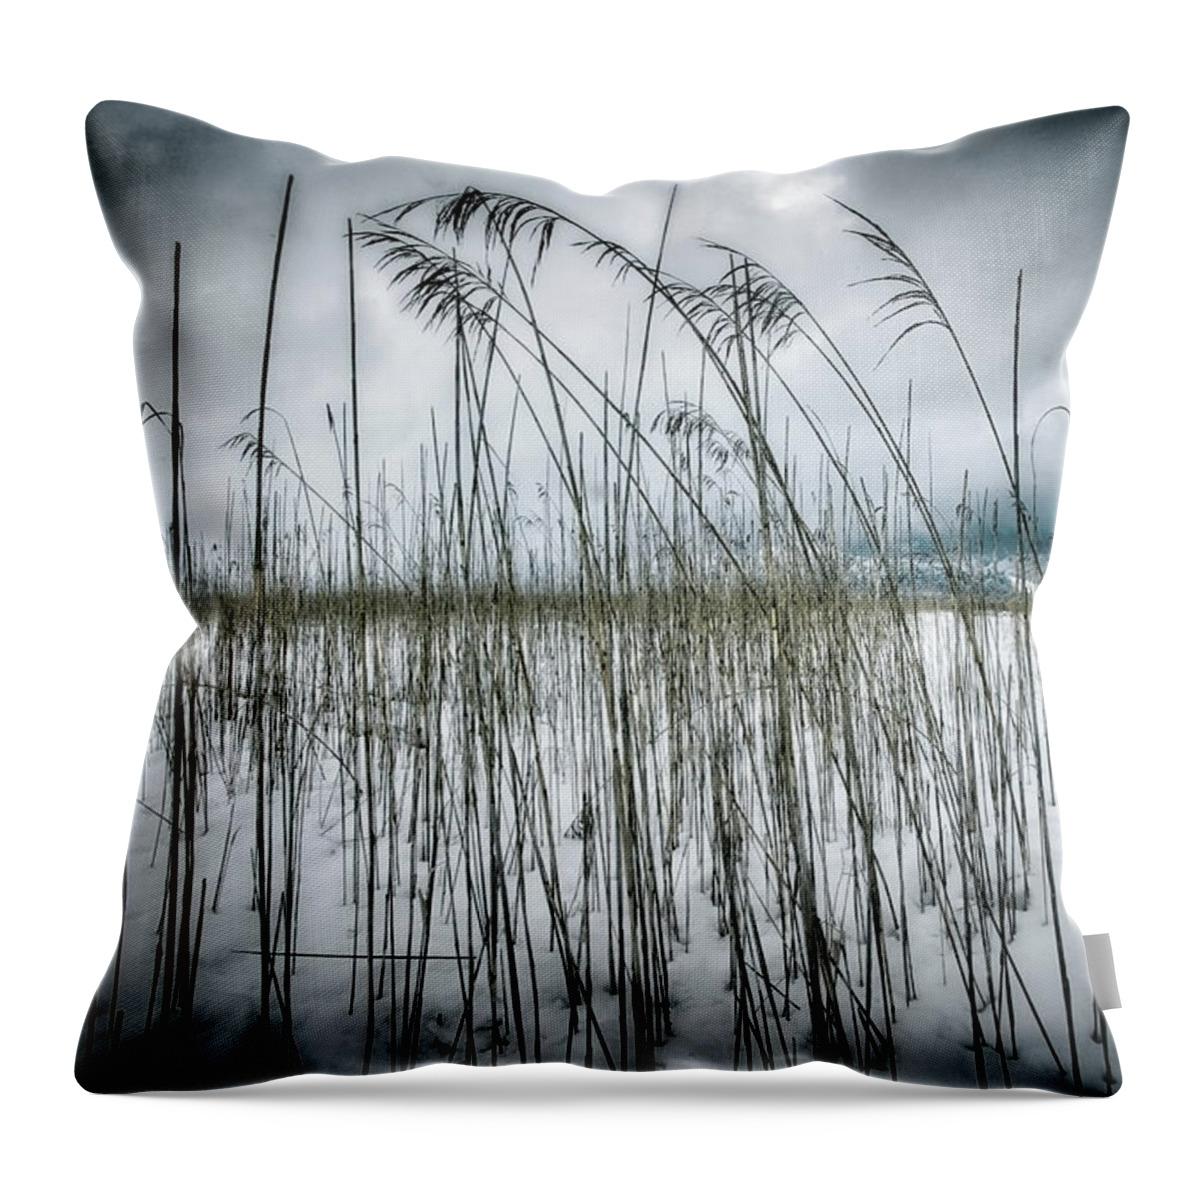 Nag006076 Throw Pillow featuring the photograph Fragile Nature by Edmund Nagele FRPS